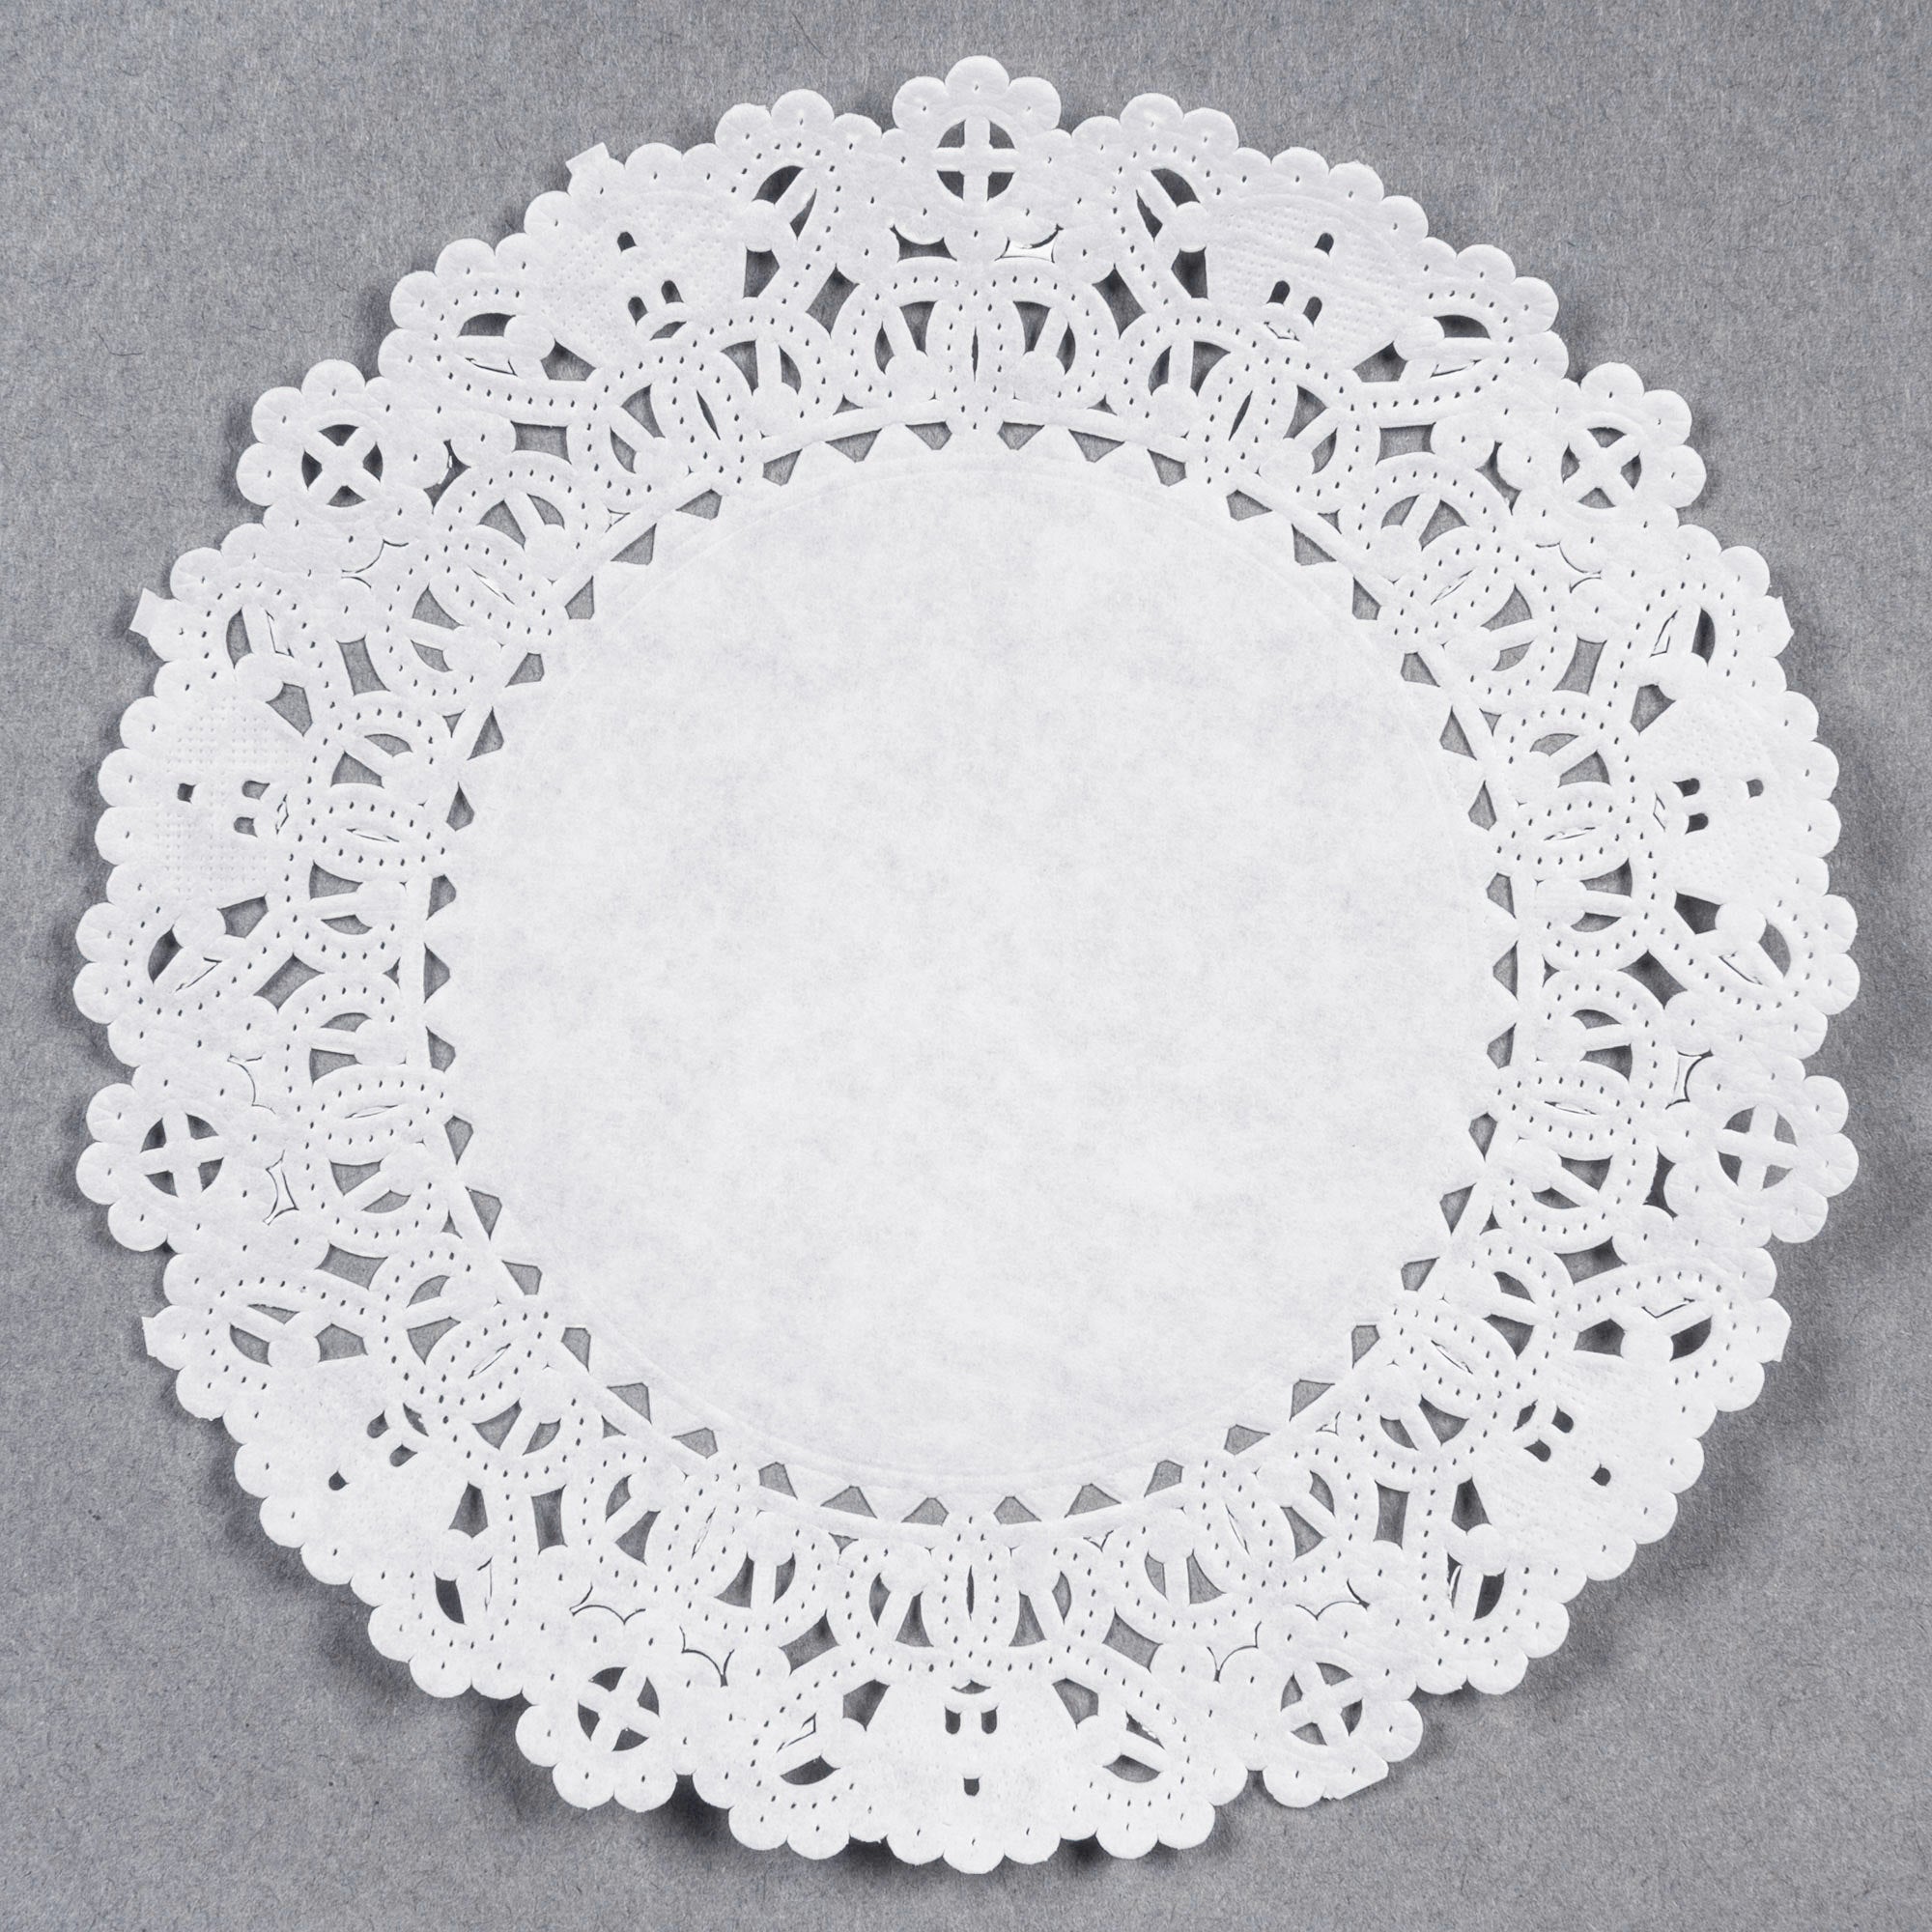 Paper Doily Pack. 10 Intricate Incredibly Finely Detailed Paper Doilies NEW  Styles 19706. 